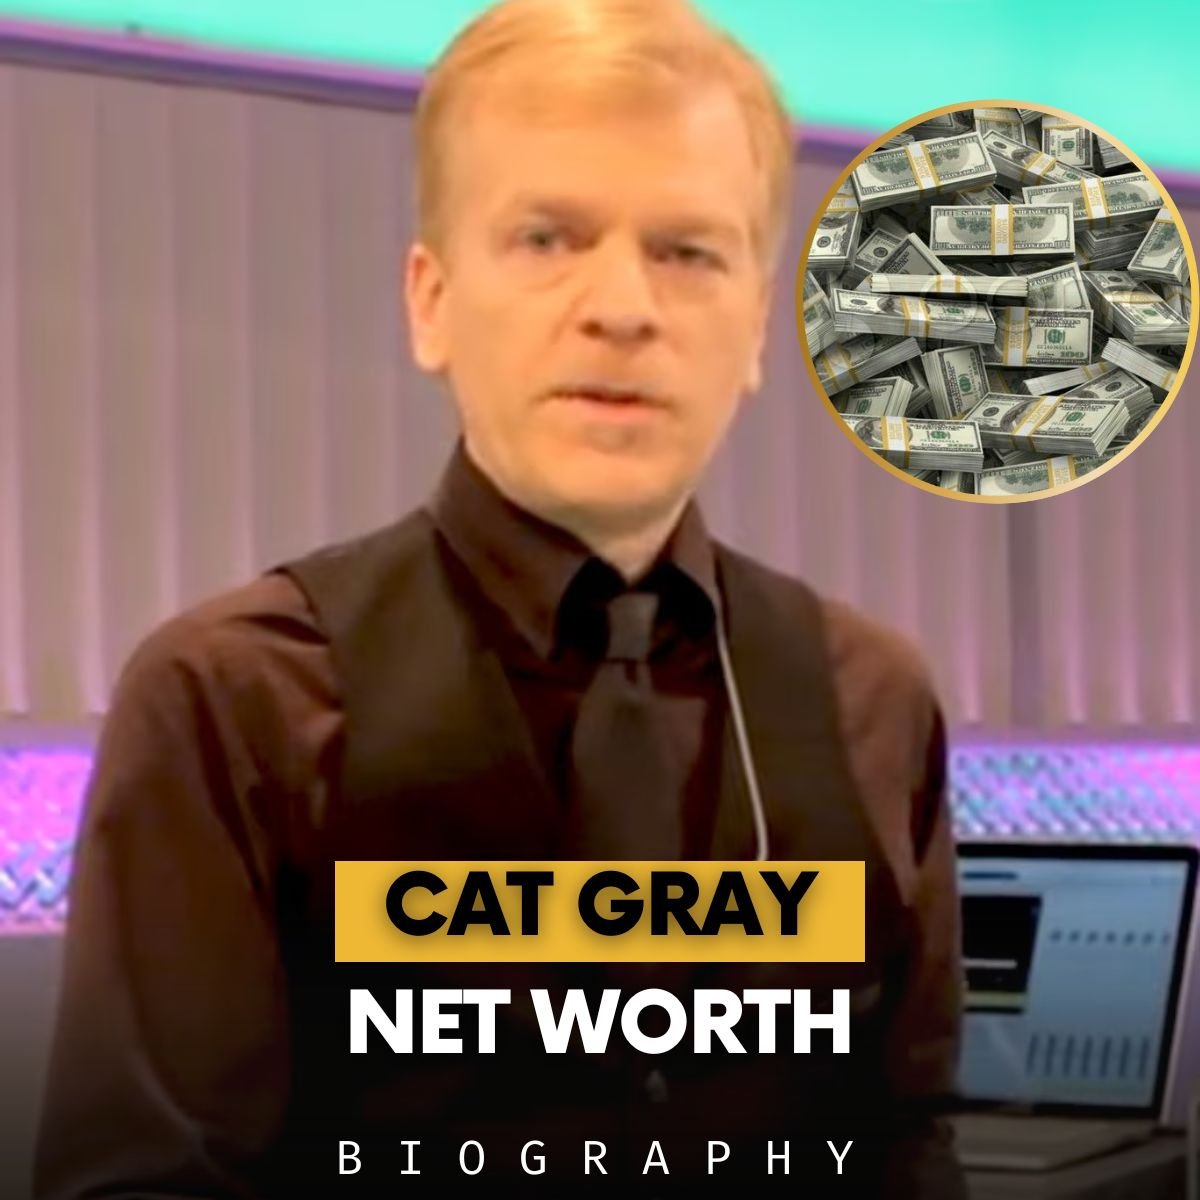 Picture of Cat Gray from Let's Make A Deal show